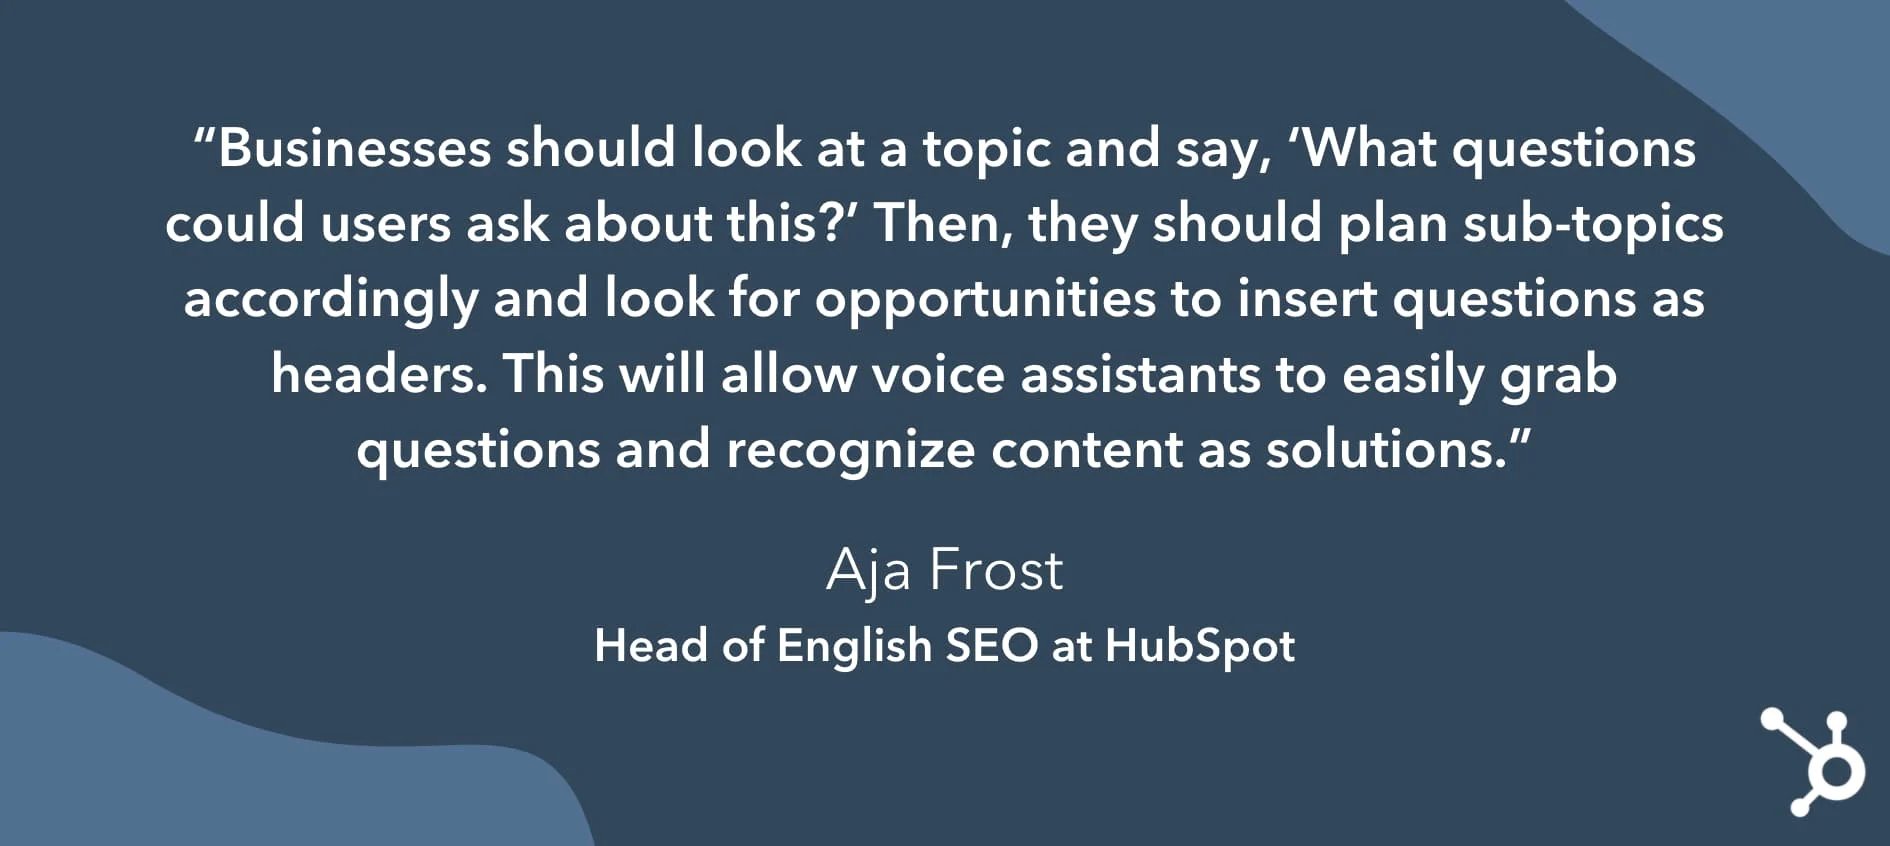 Quote from Aja Frost saying that businesses should predict what questions search audiences will ask about topics in their industry